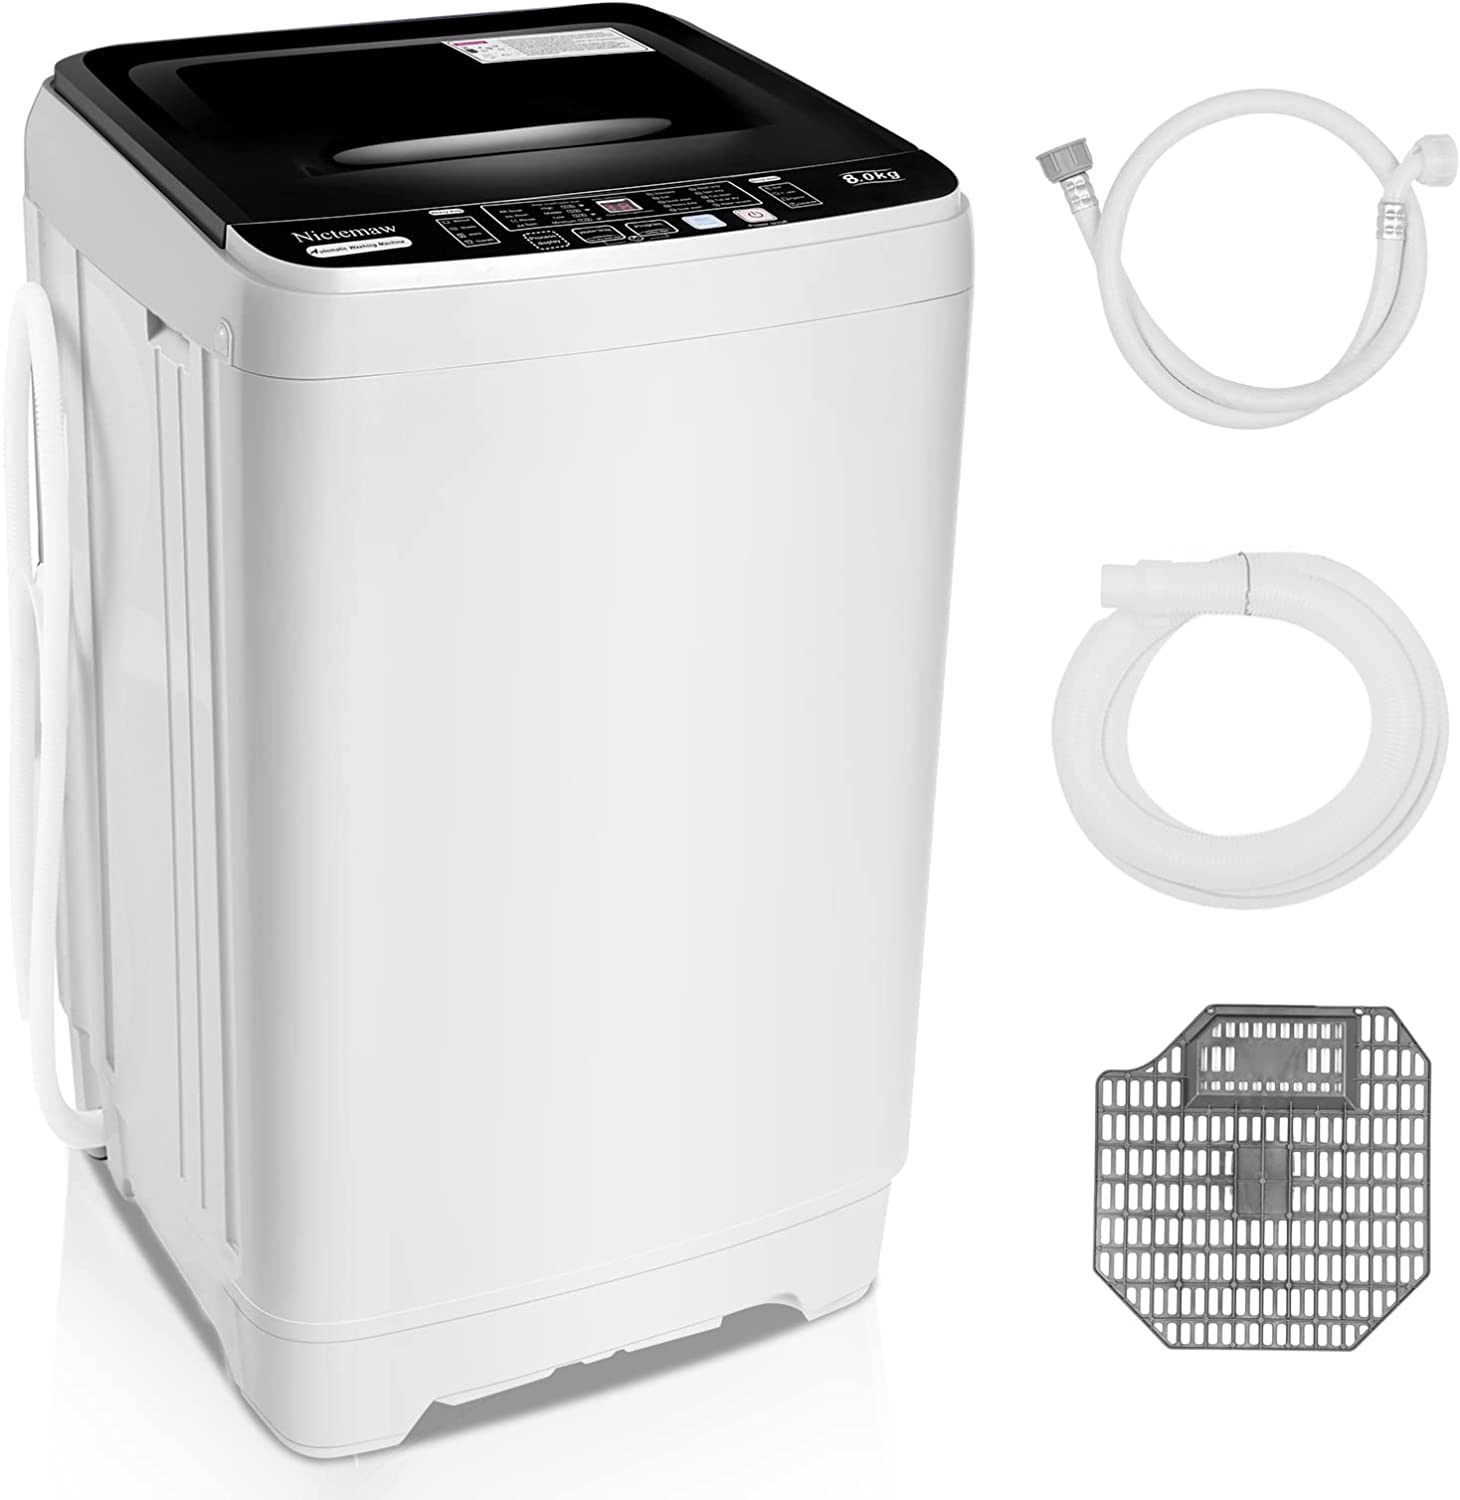 Nictemaw 2-in-1 Compact Laundry Washer